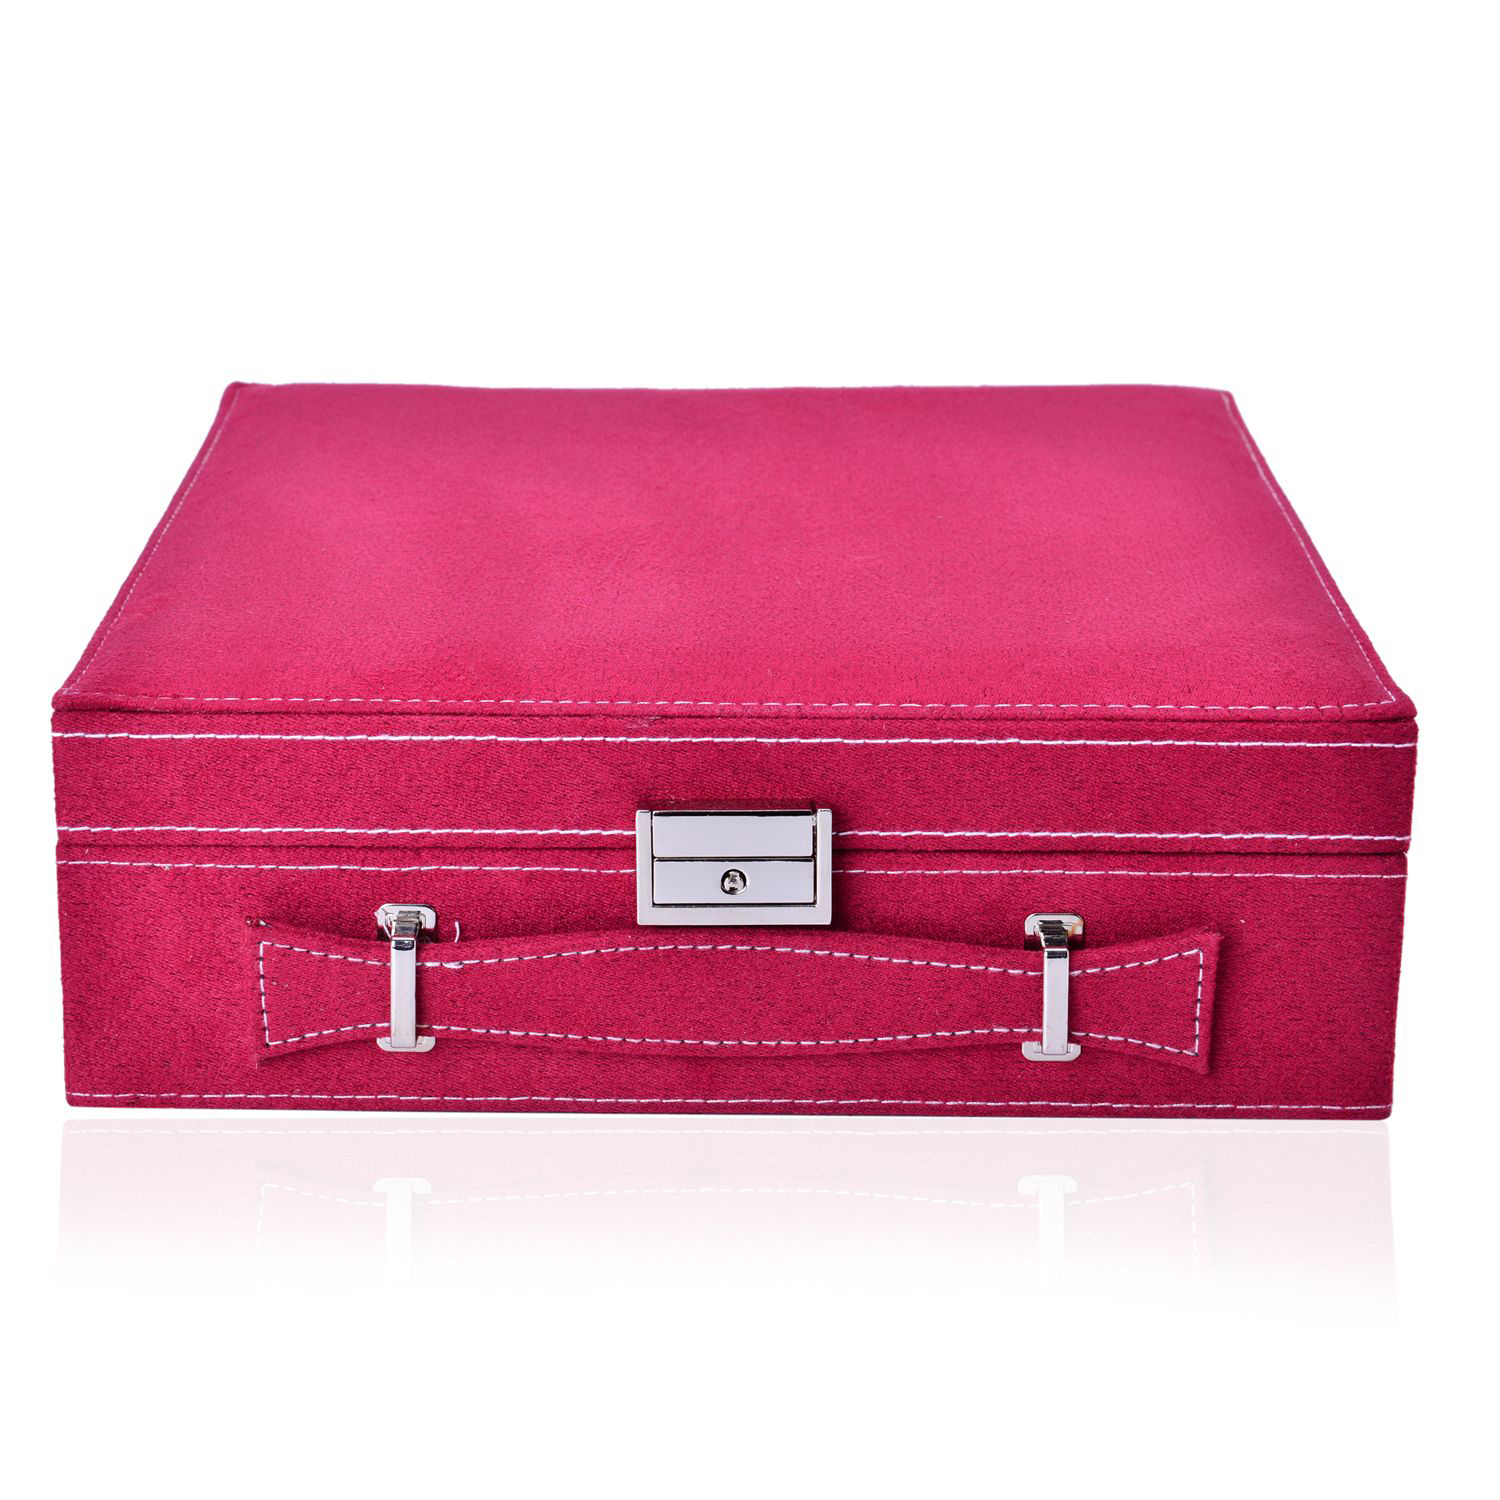 Shop LC Red Fuchsia Travel Jewelry Organizer Box Case for Women Faux Velvet  Tarnish 2 Layer Necklace Earrings Ring Jewelry Holder Portable Jewelry Box  Storage Birthday Gifts 